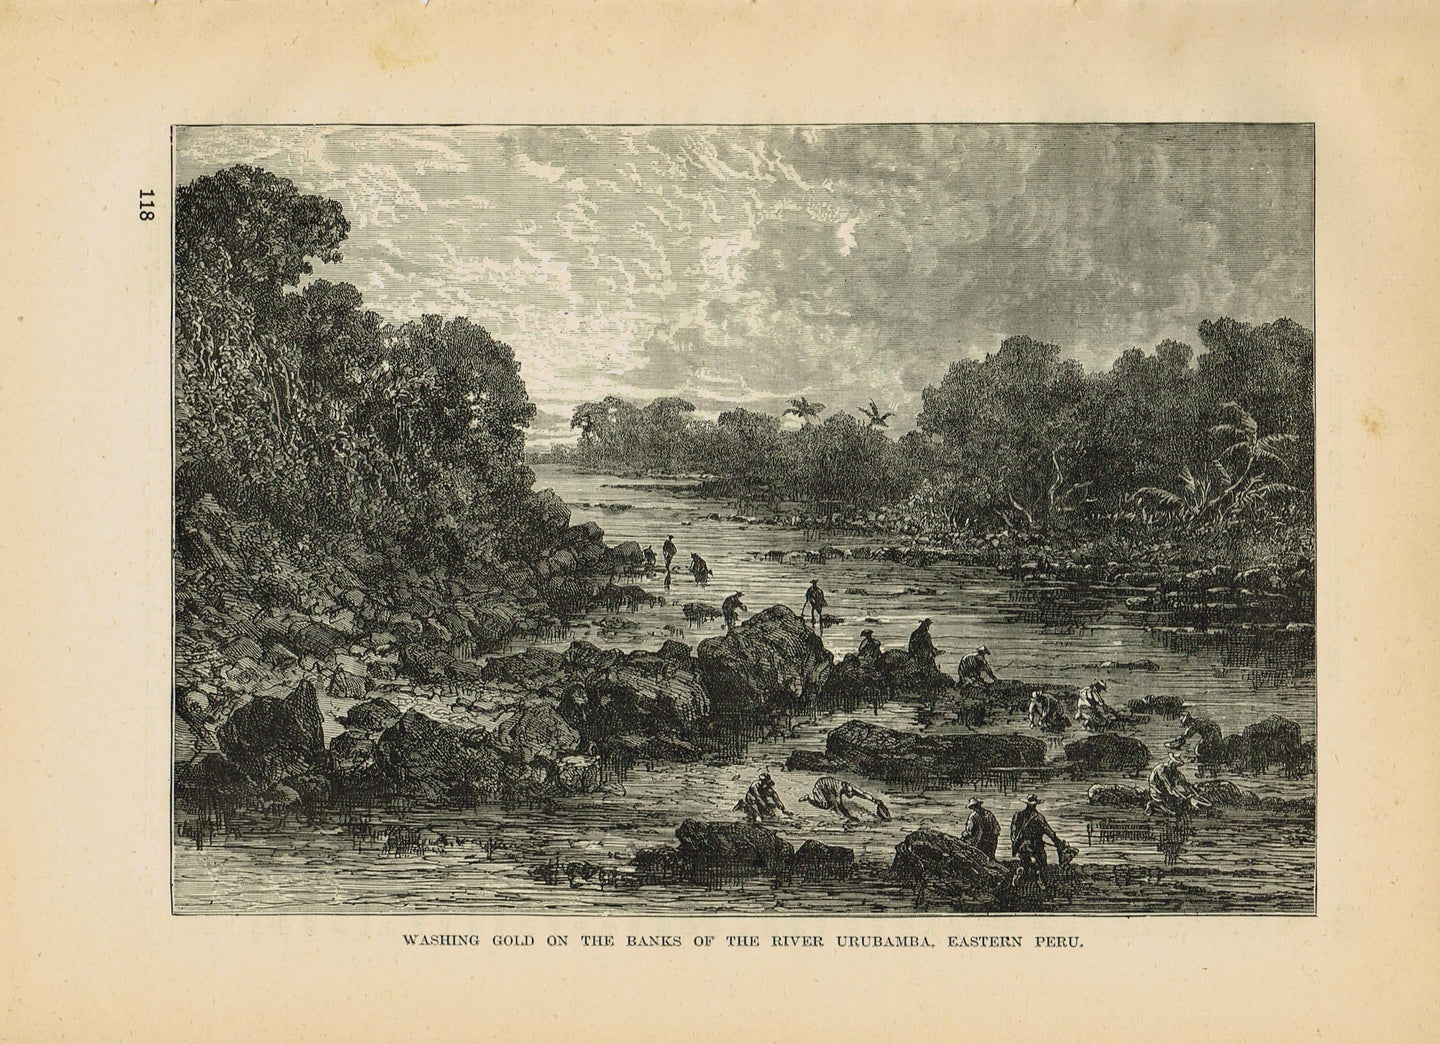 Genuine-Antique-Print-Washing-Gold-on-the-Banks-of-The-River-Urubamba-Eastern-Peru--1881-Robert-Brown-Maps-Of-Antiquity